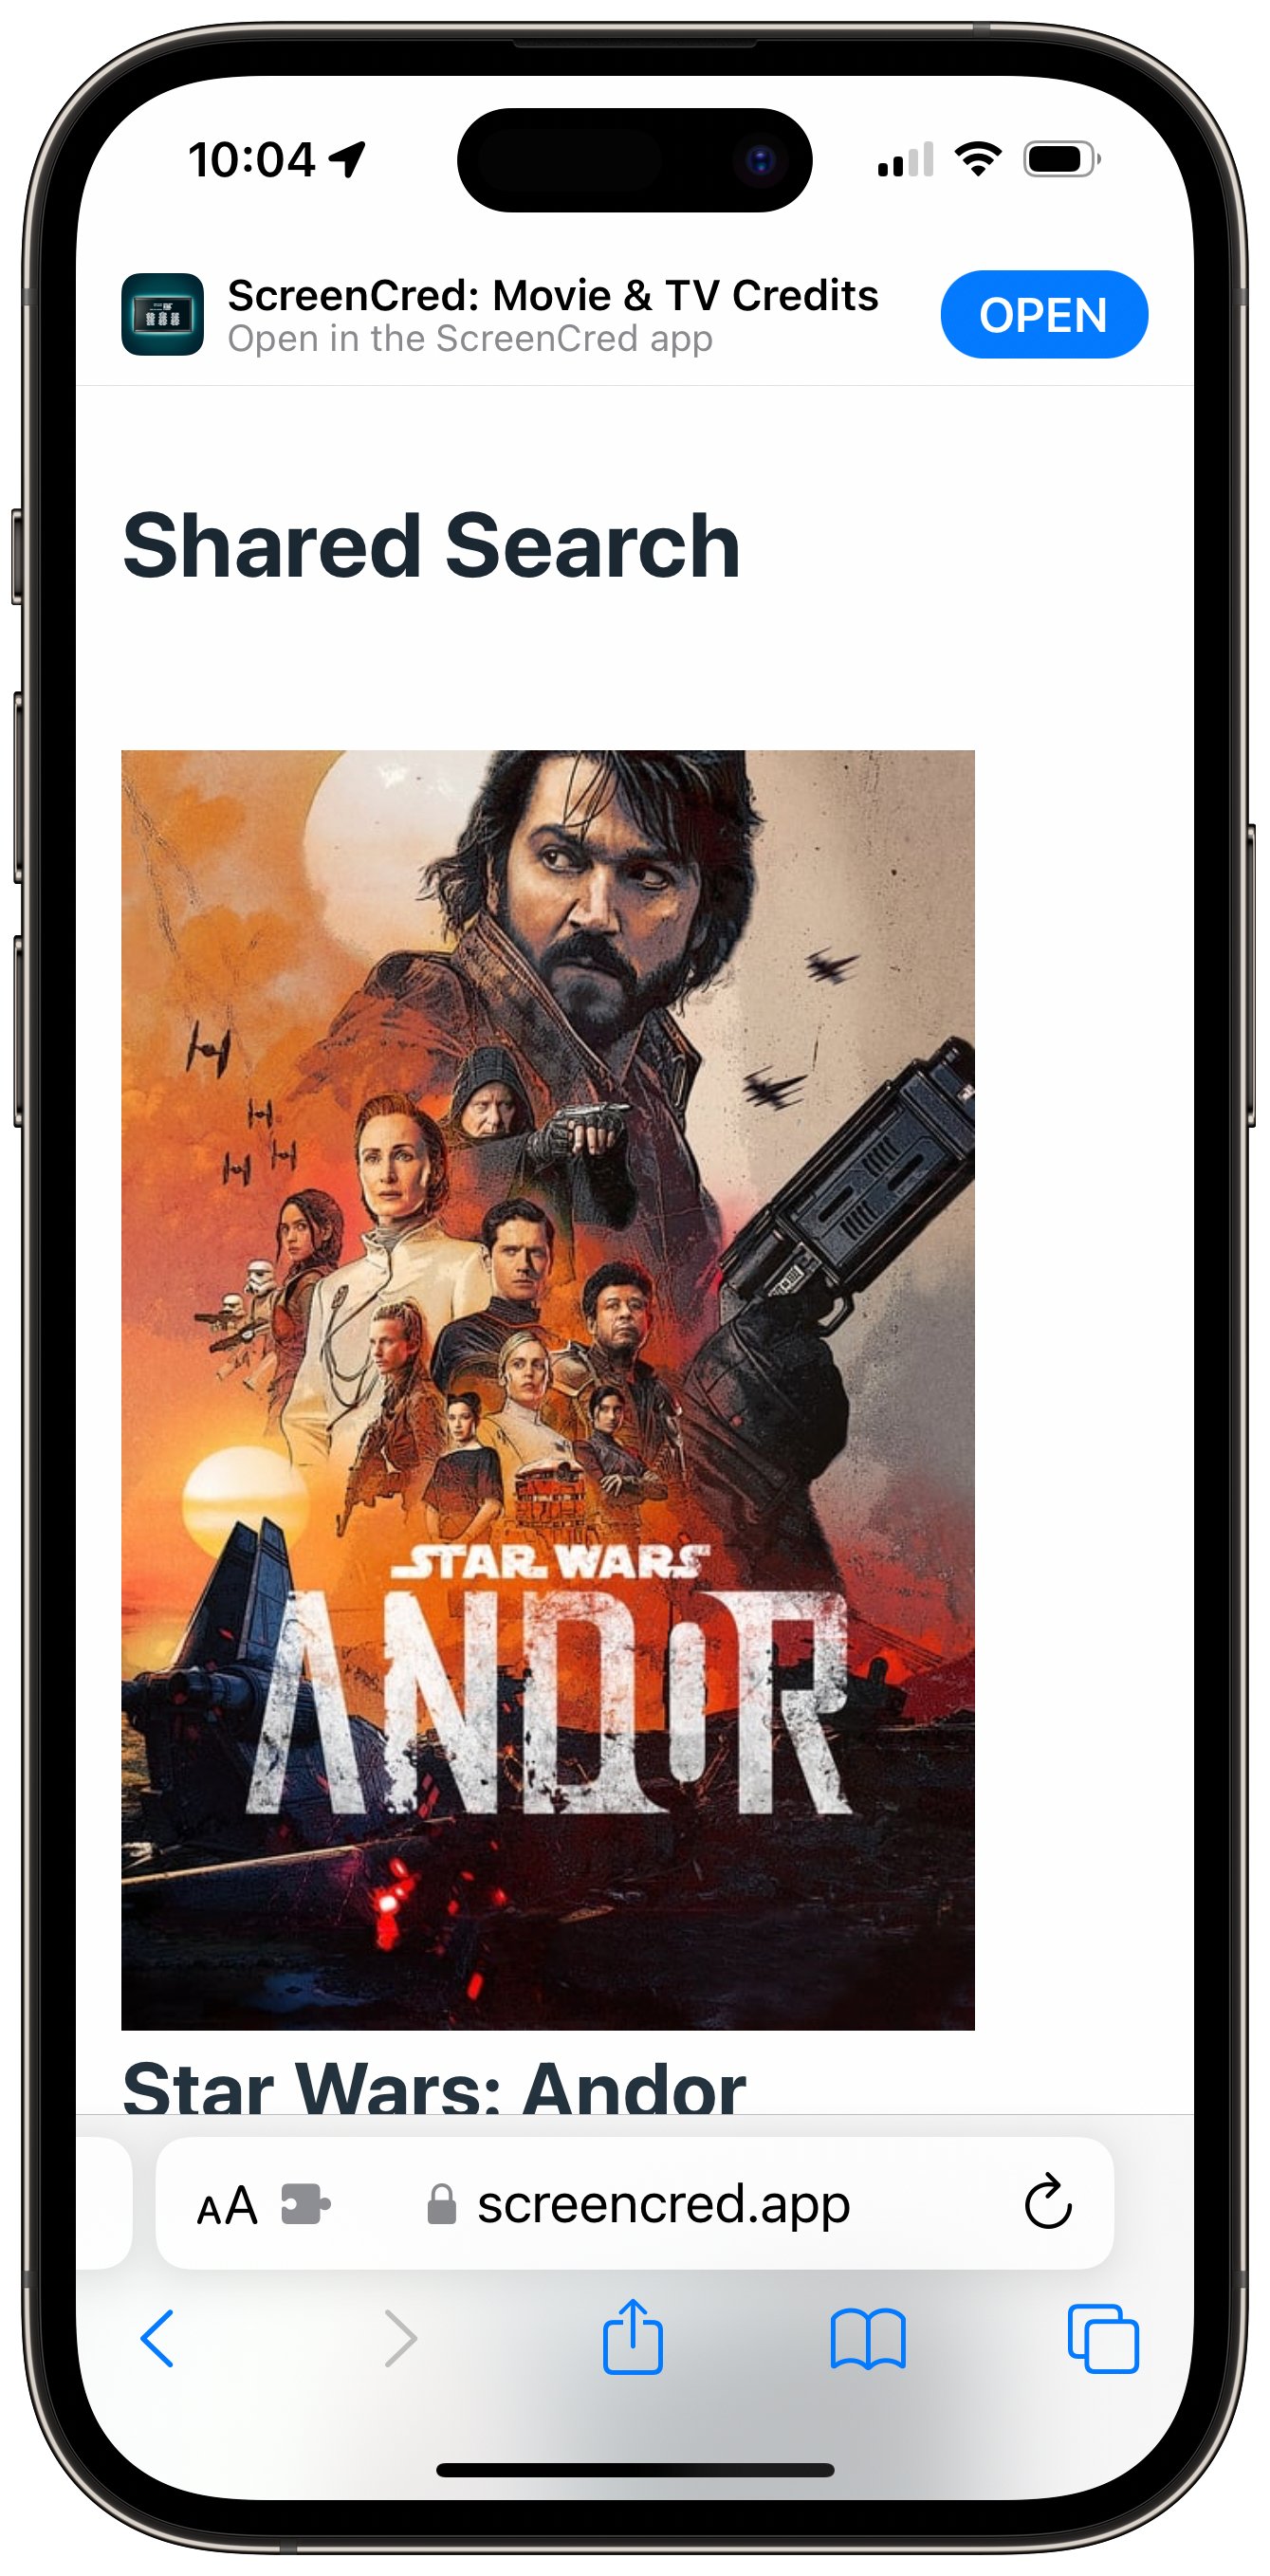 Screenshot of a website showing the poster image of Star Wars: Andor and a partial poster of Rogue One: A Star Wars Story